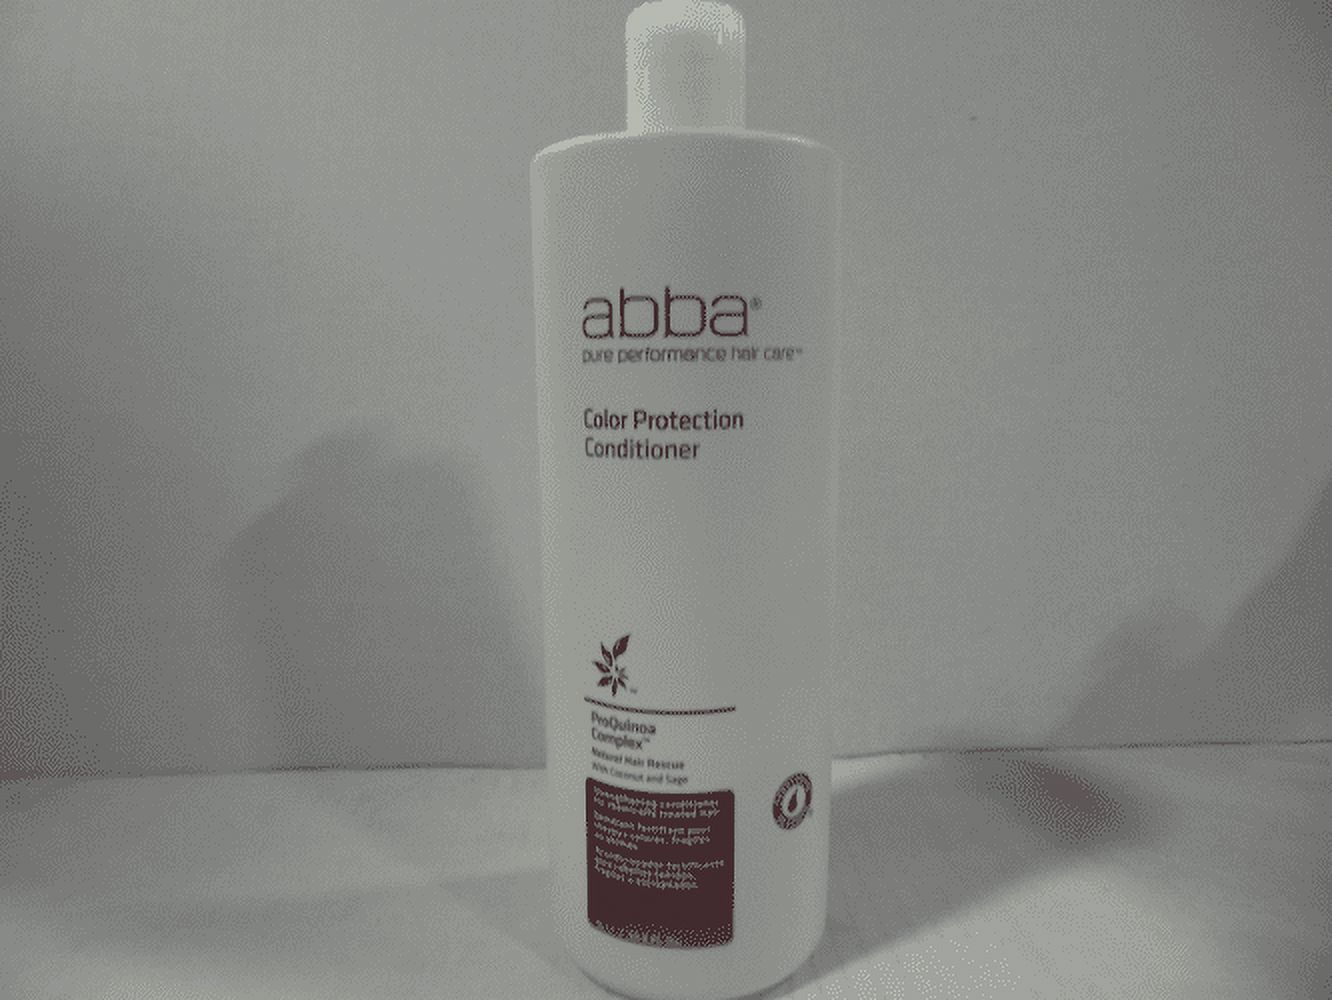 Abba Color Protection Conditioner 33.8 oz - image 1 of 1